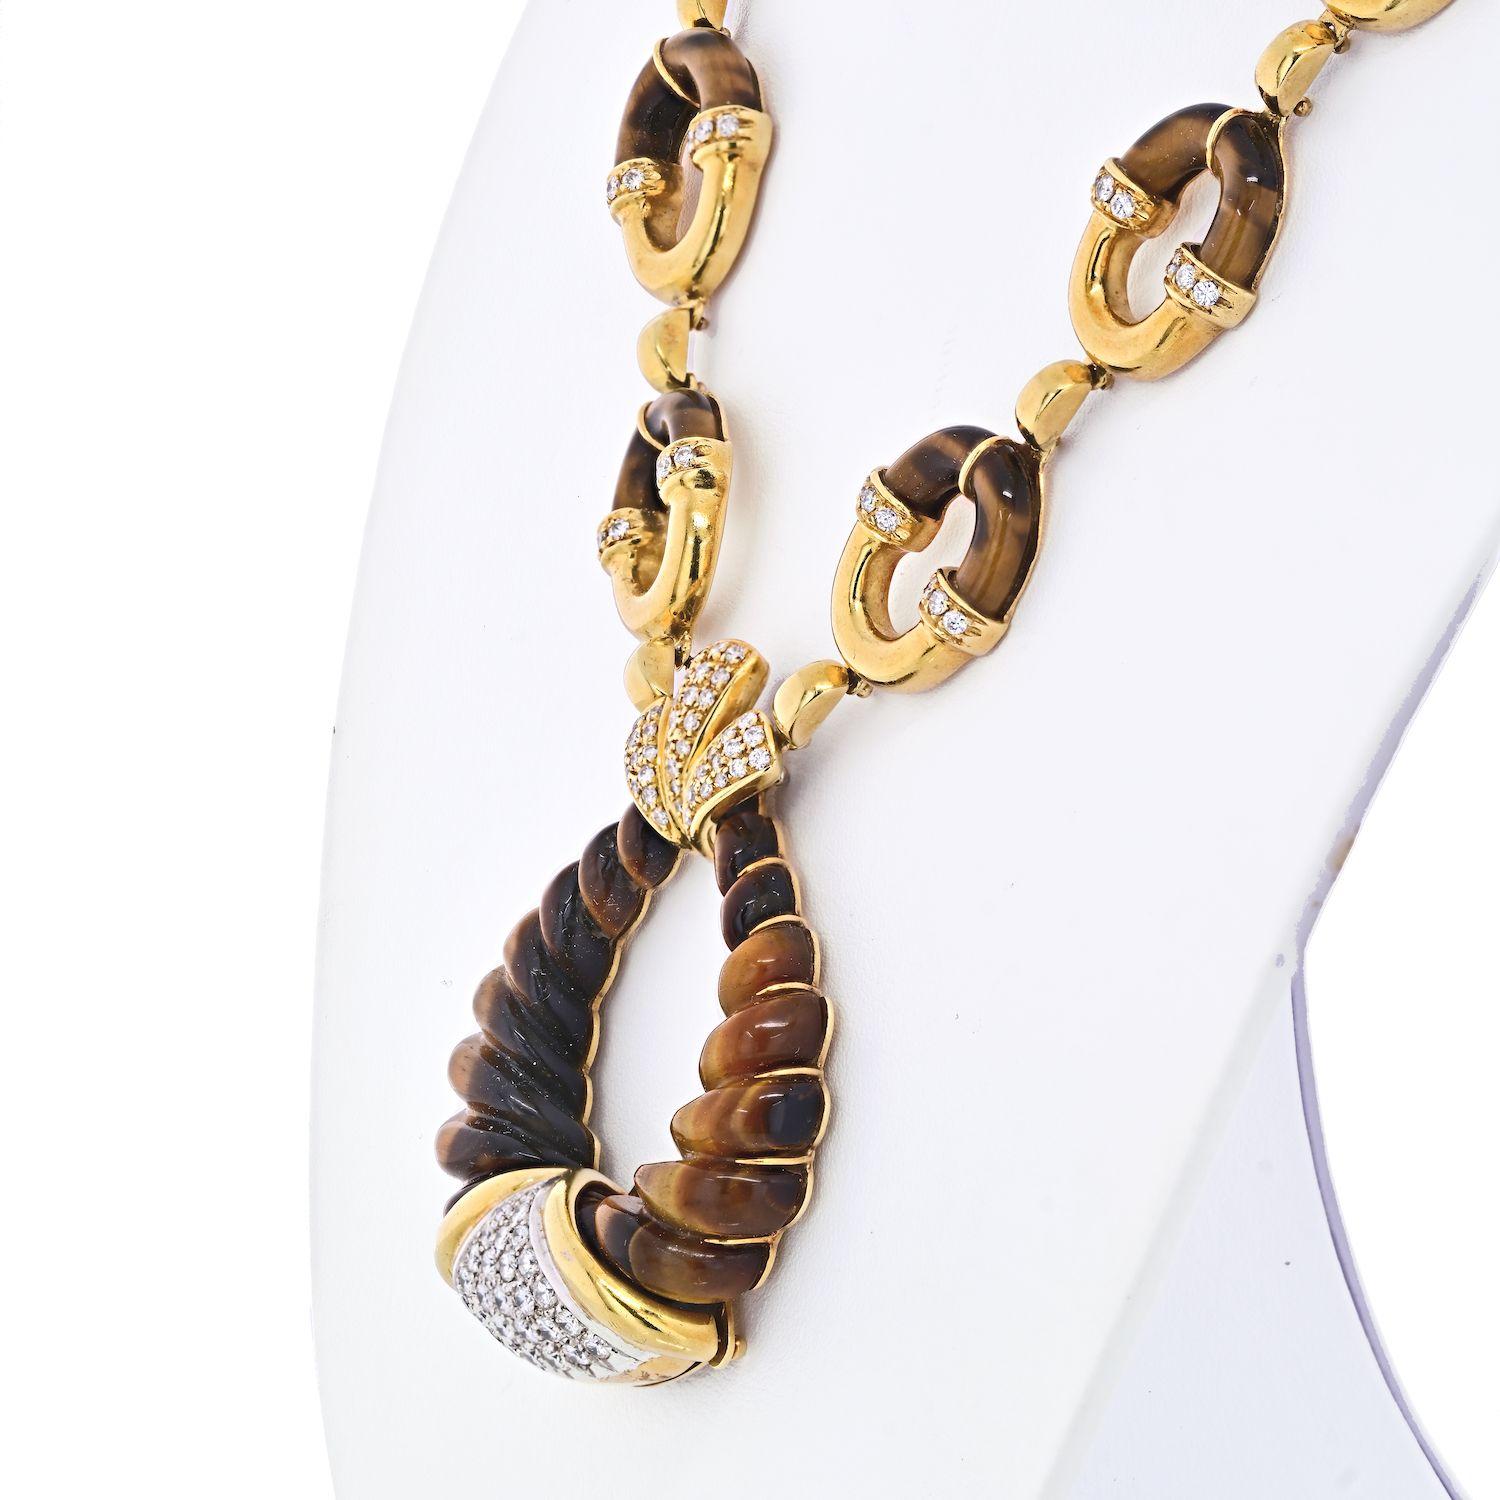 This Unusual Tribal Motif Tiger Eye and Diamond Link Necklace was created in 1970's and is made of pure 18k yellow gold. We love the high end look of this piece, that resembles oh so many New York and LA designers. However, since this item is not